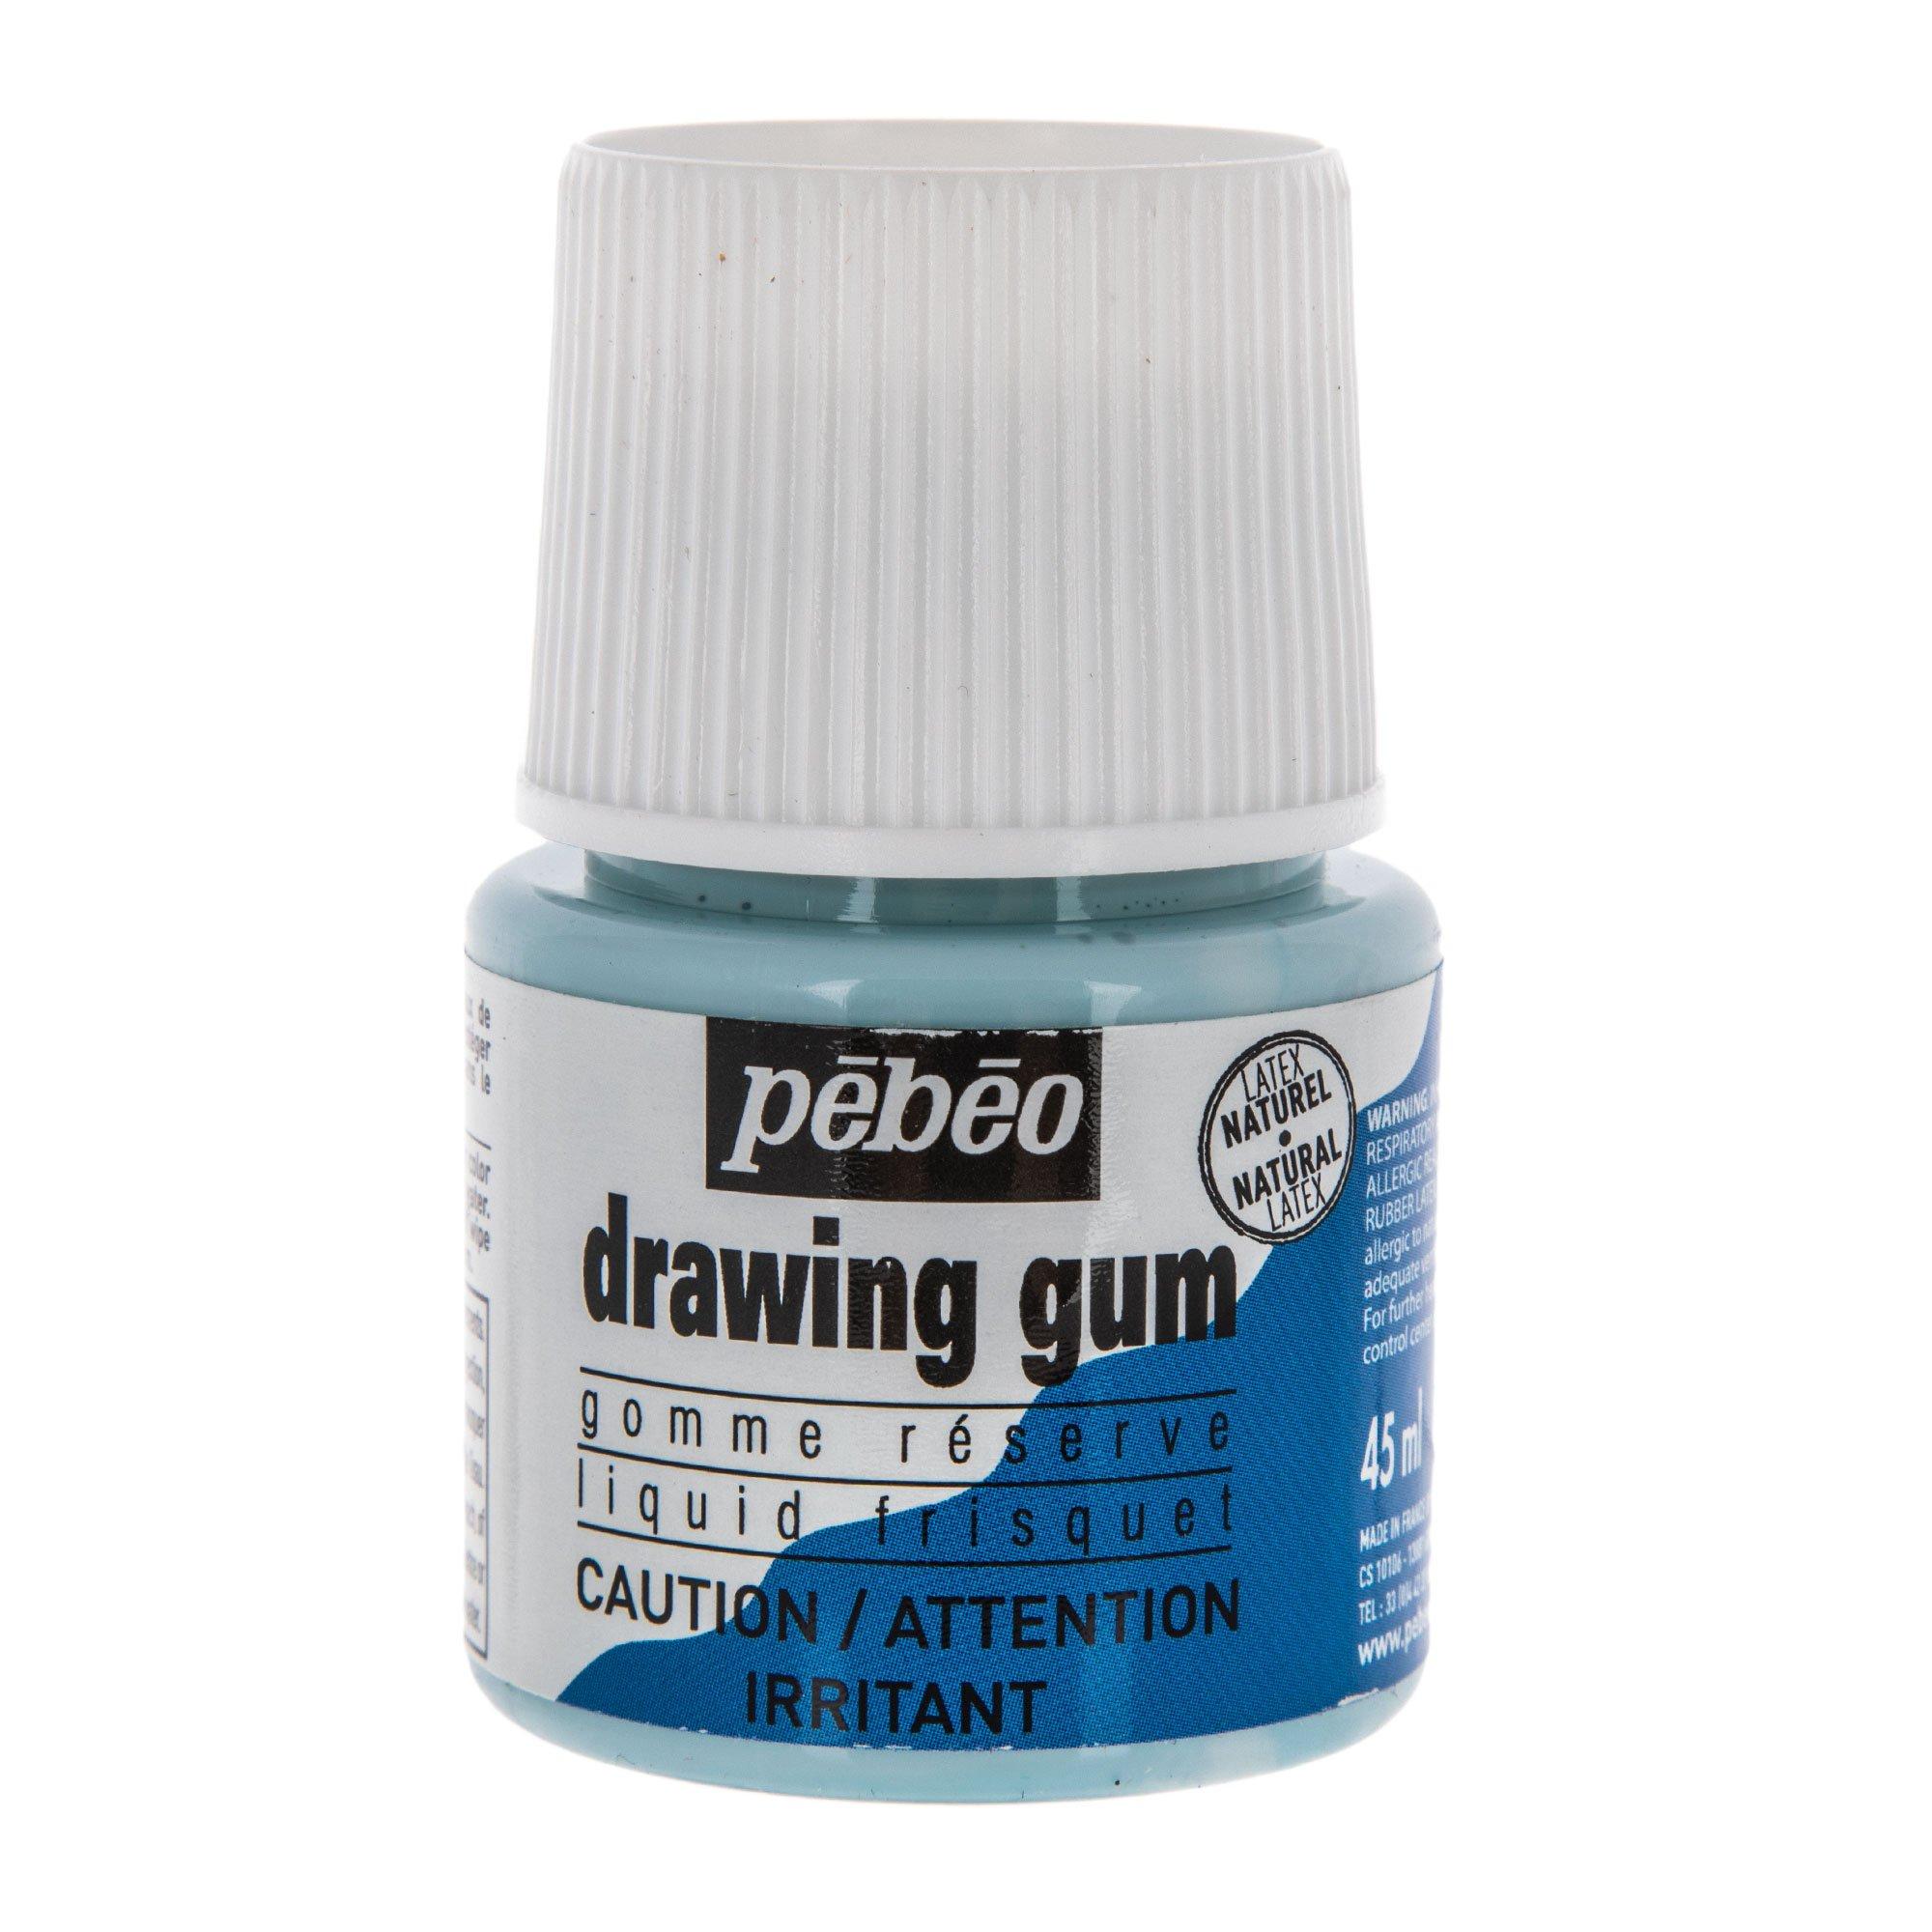 Pebeo Drawing Gum Made in France - Masking Fluid for Watercolor Painting and Various Art Projects - Bundled with Moshify Applicator Brush Set